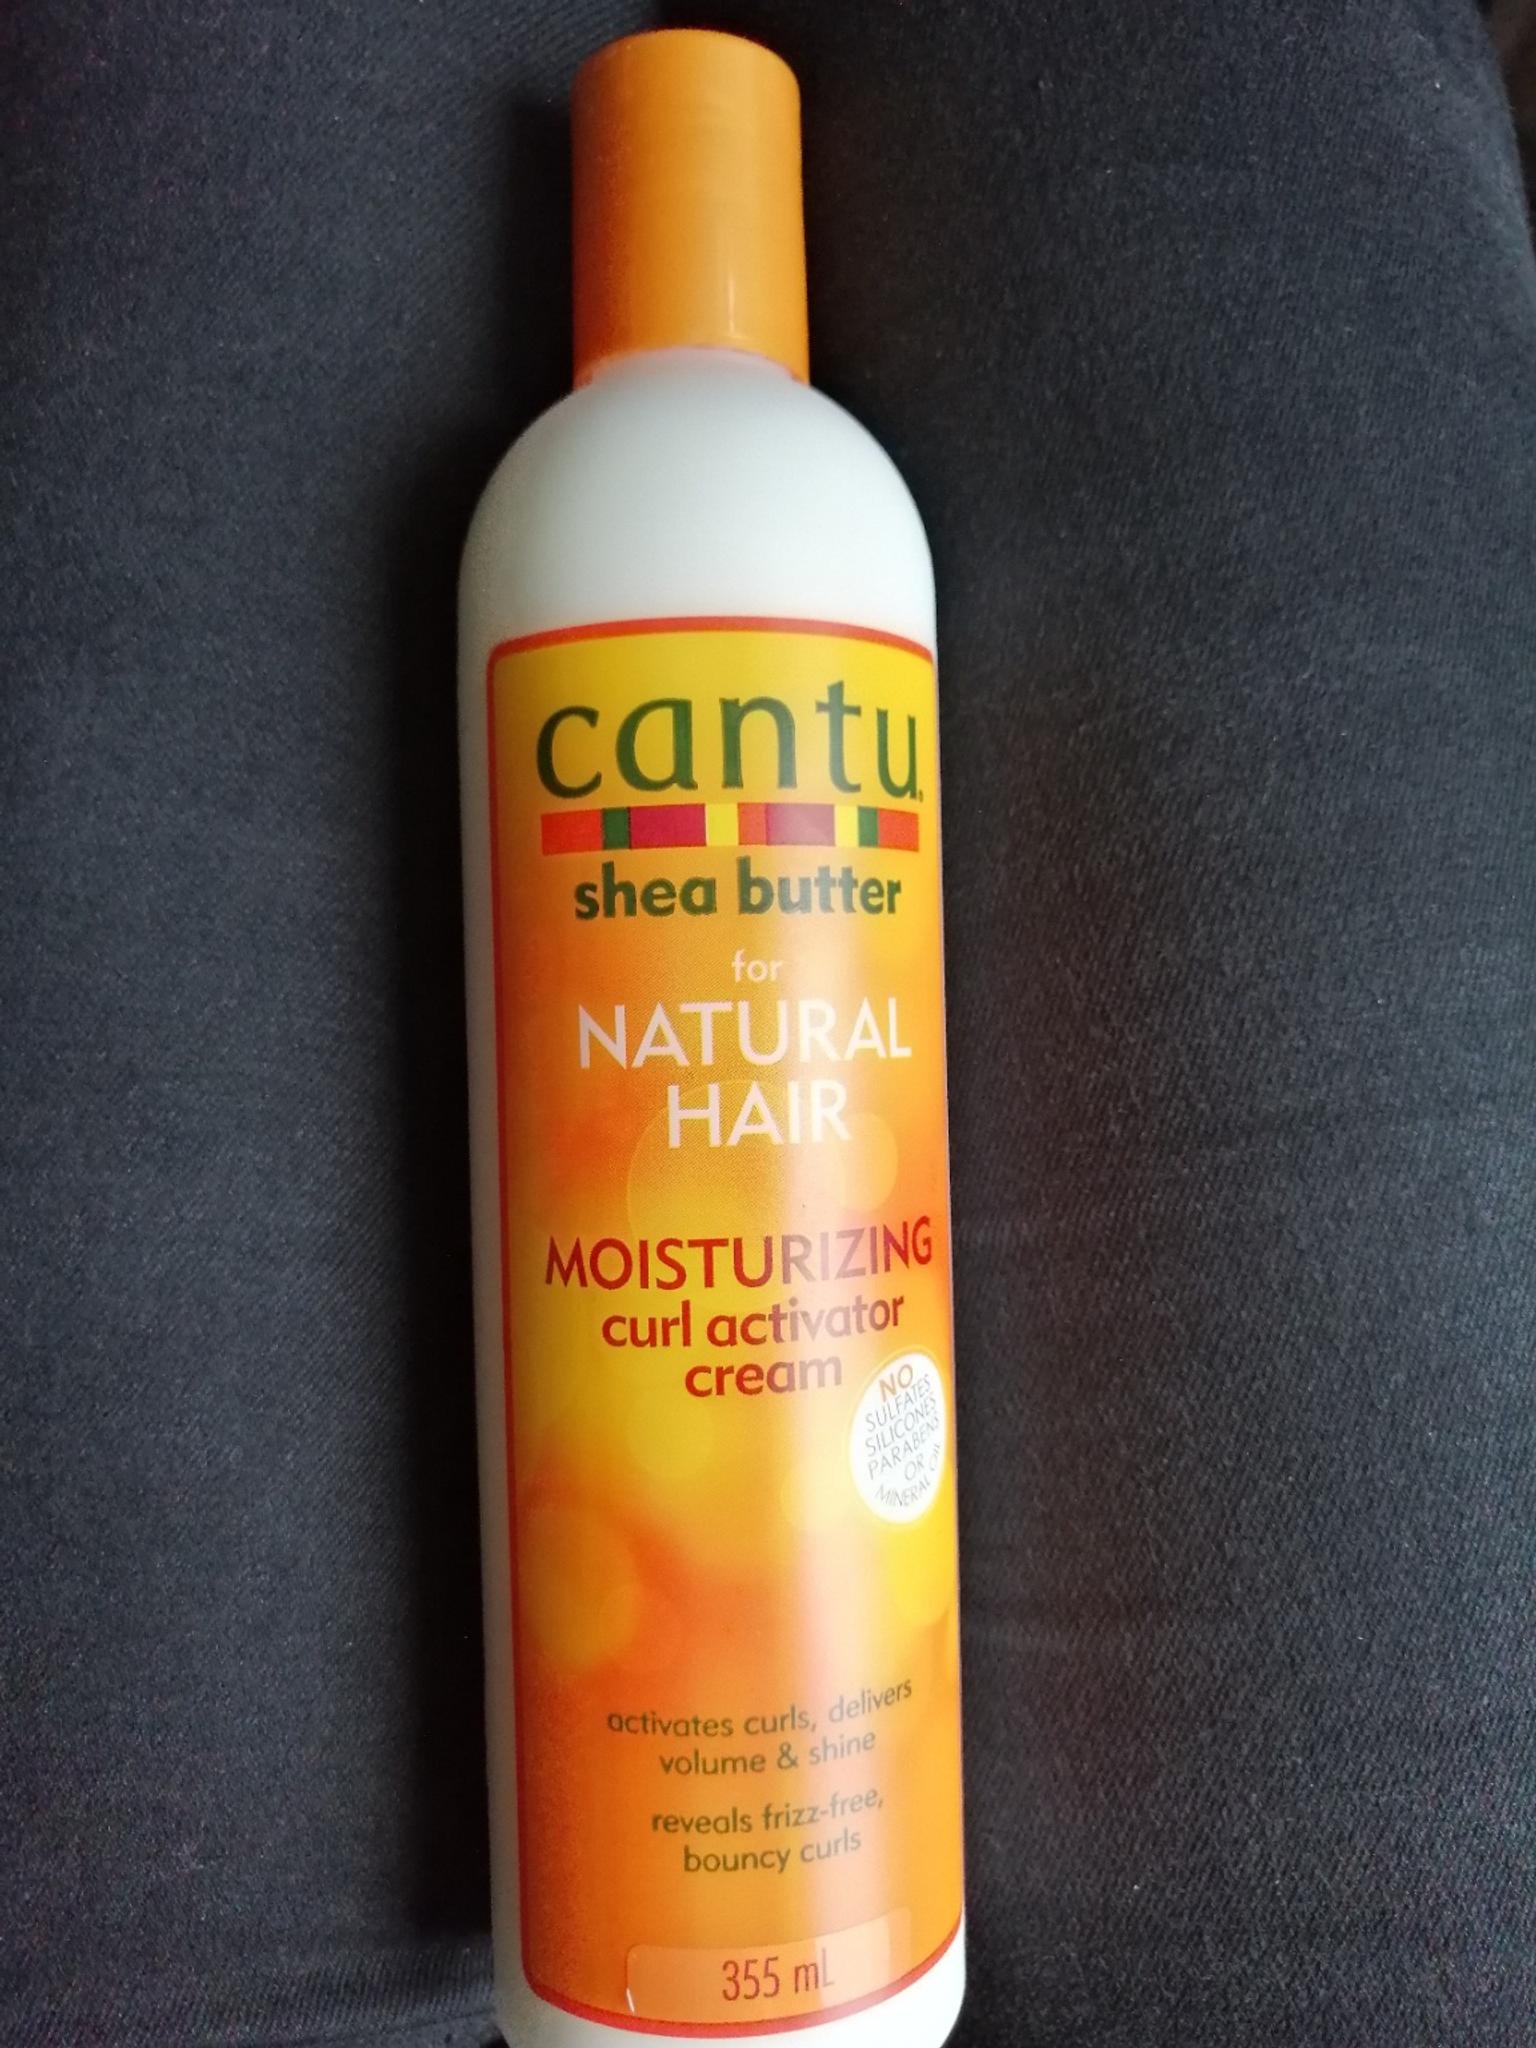 Cantu Curl Activator Cream Locken Creme In Andernach For 6 00 For Sale Shpock